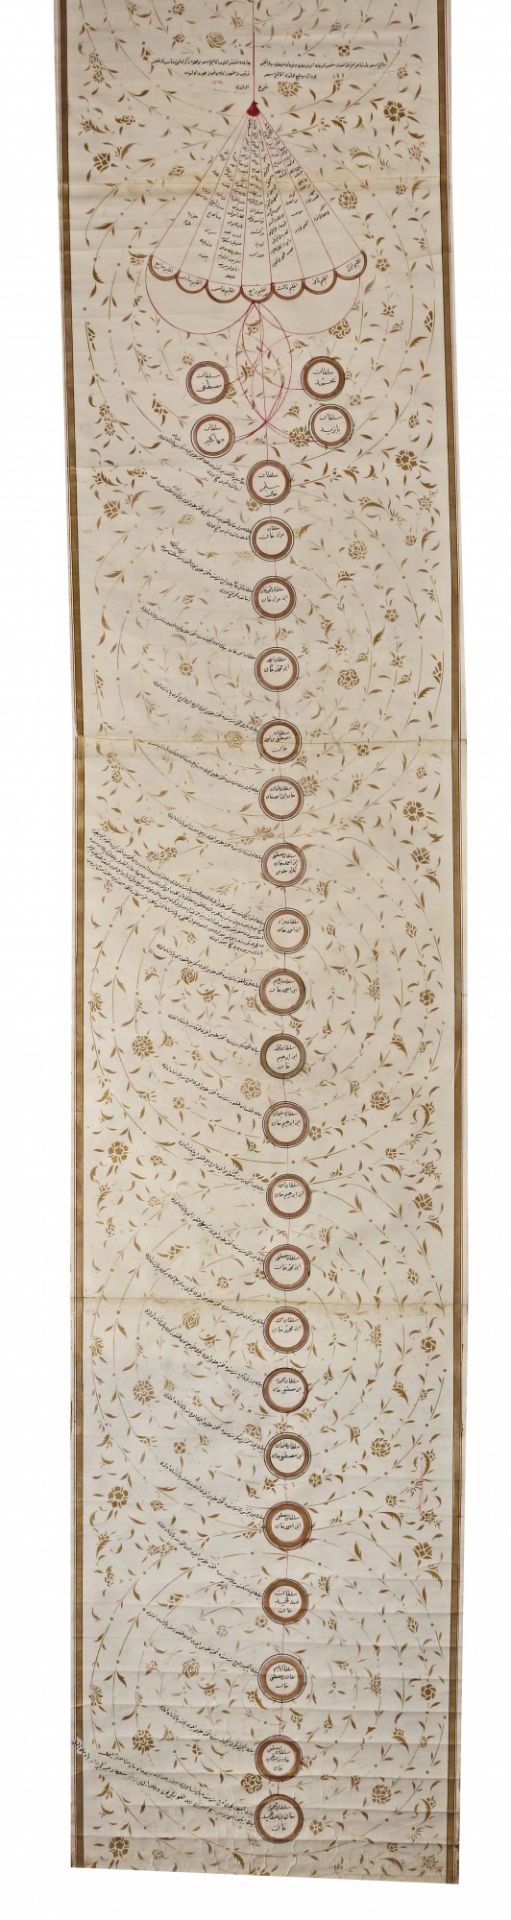 AN ISLAMIC SCROLL ON PAPER, GENEALOGICAL TREE OF THE PROPHET MUHAMMAD, OTTOMAN, 19TH CENTURY - Image 8 of 11